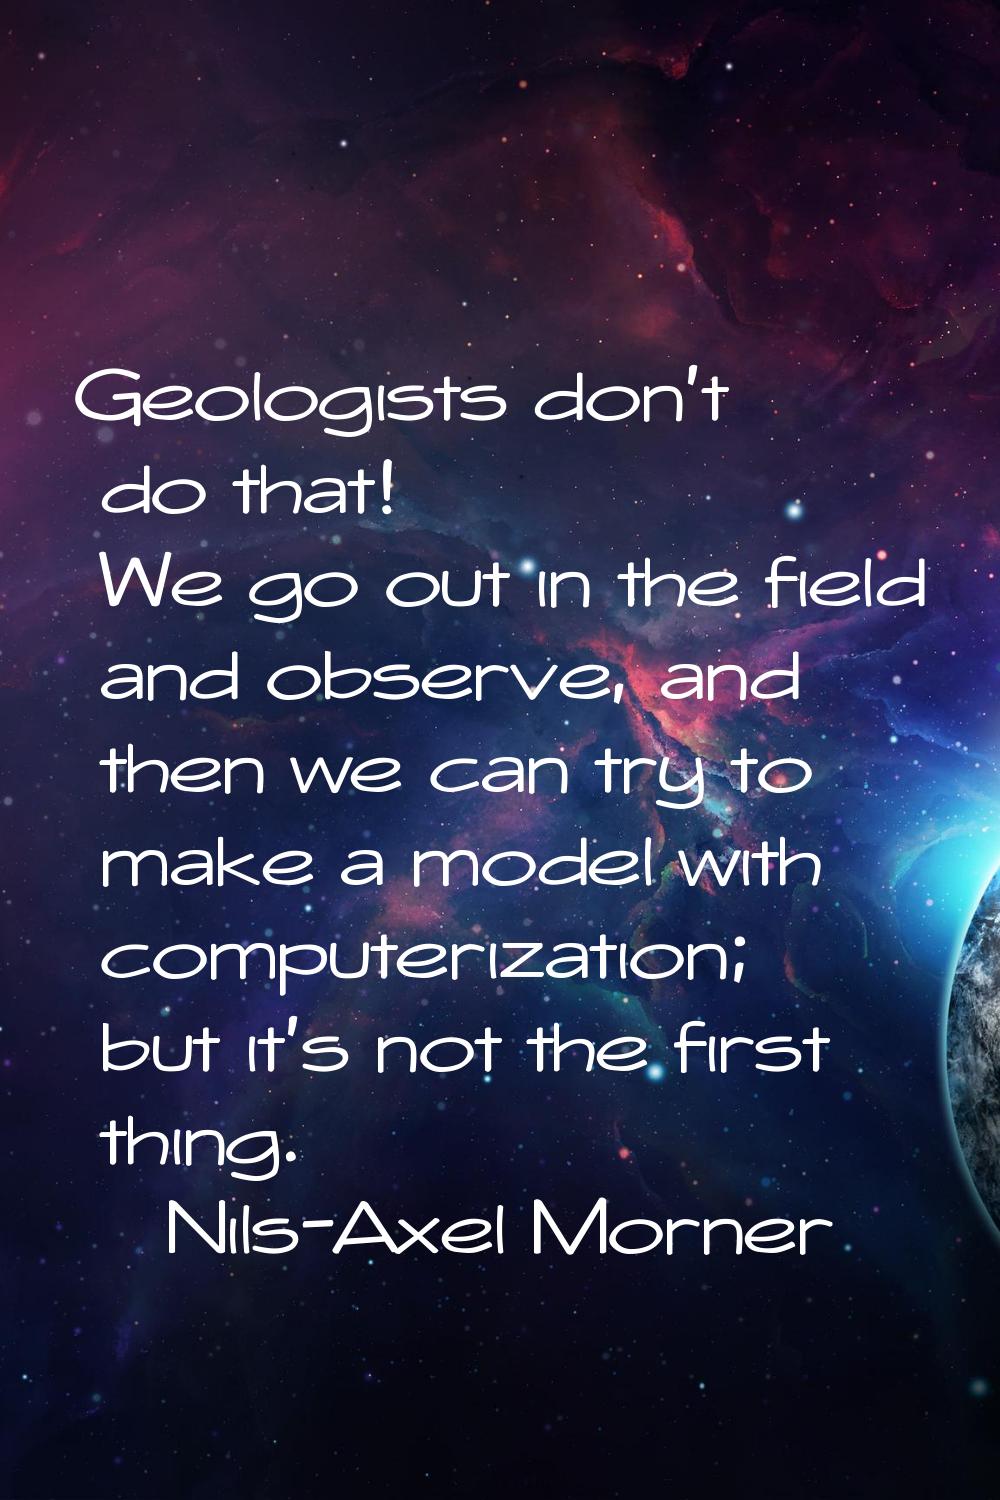 Geologists don't do that! We go out in the field and observe, and then we can try to make a model w